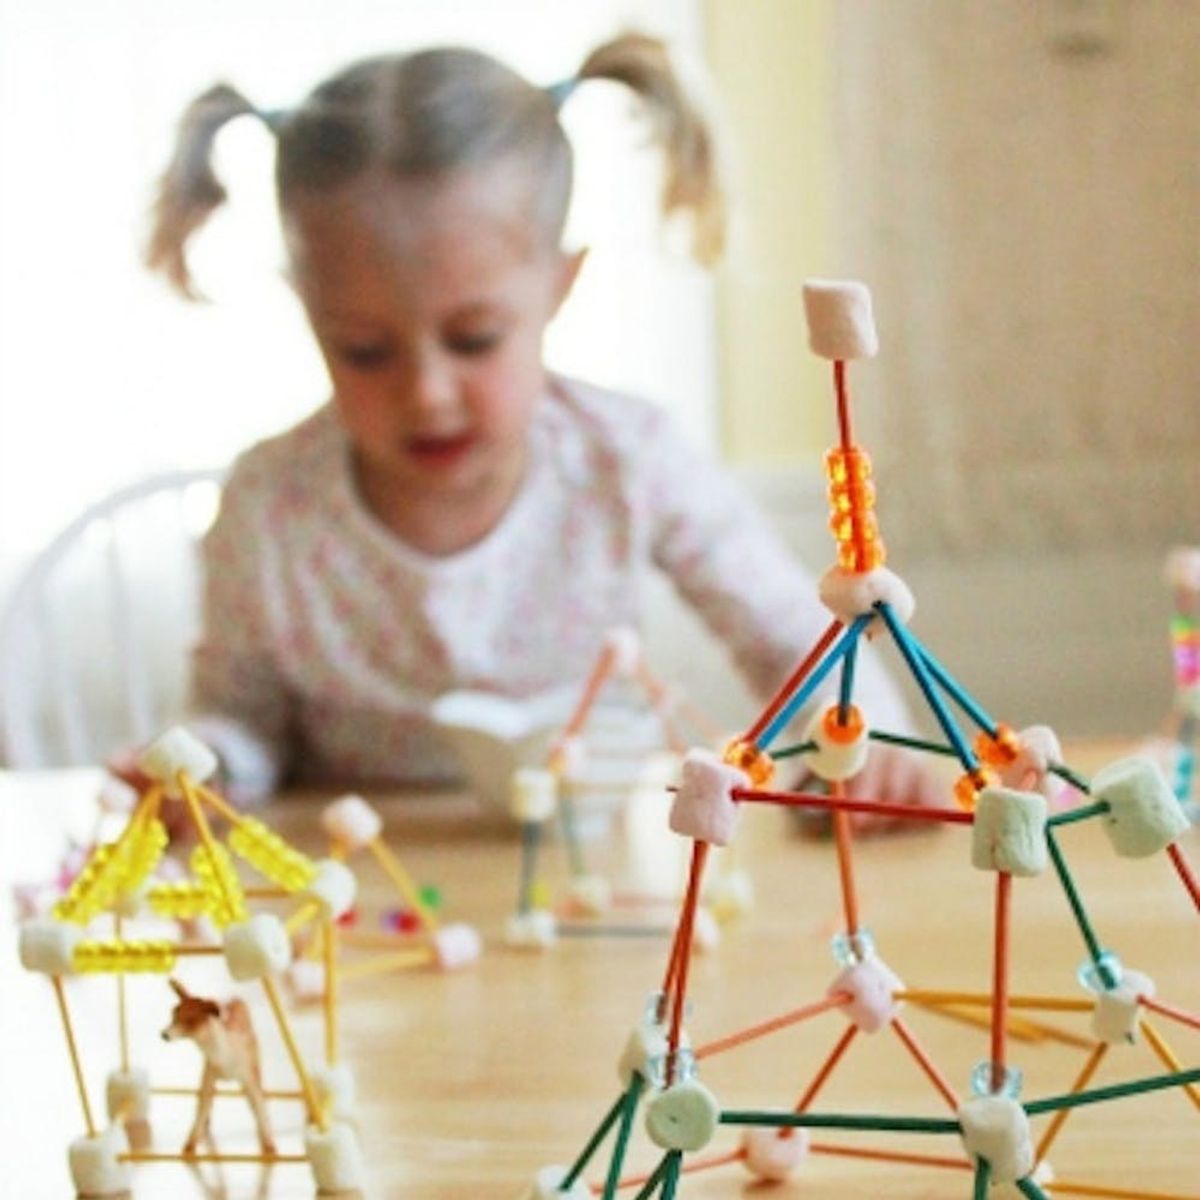 20 After-School Activities to Keep Kids Entertained + Parents Sane